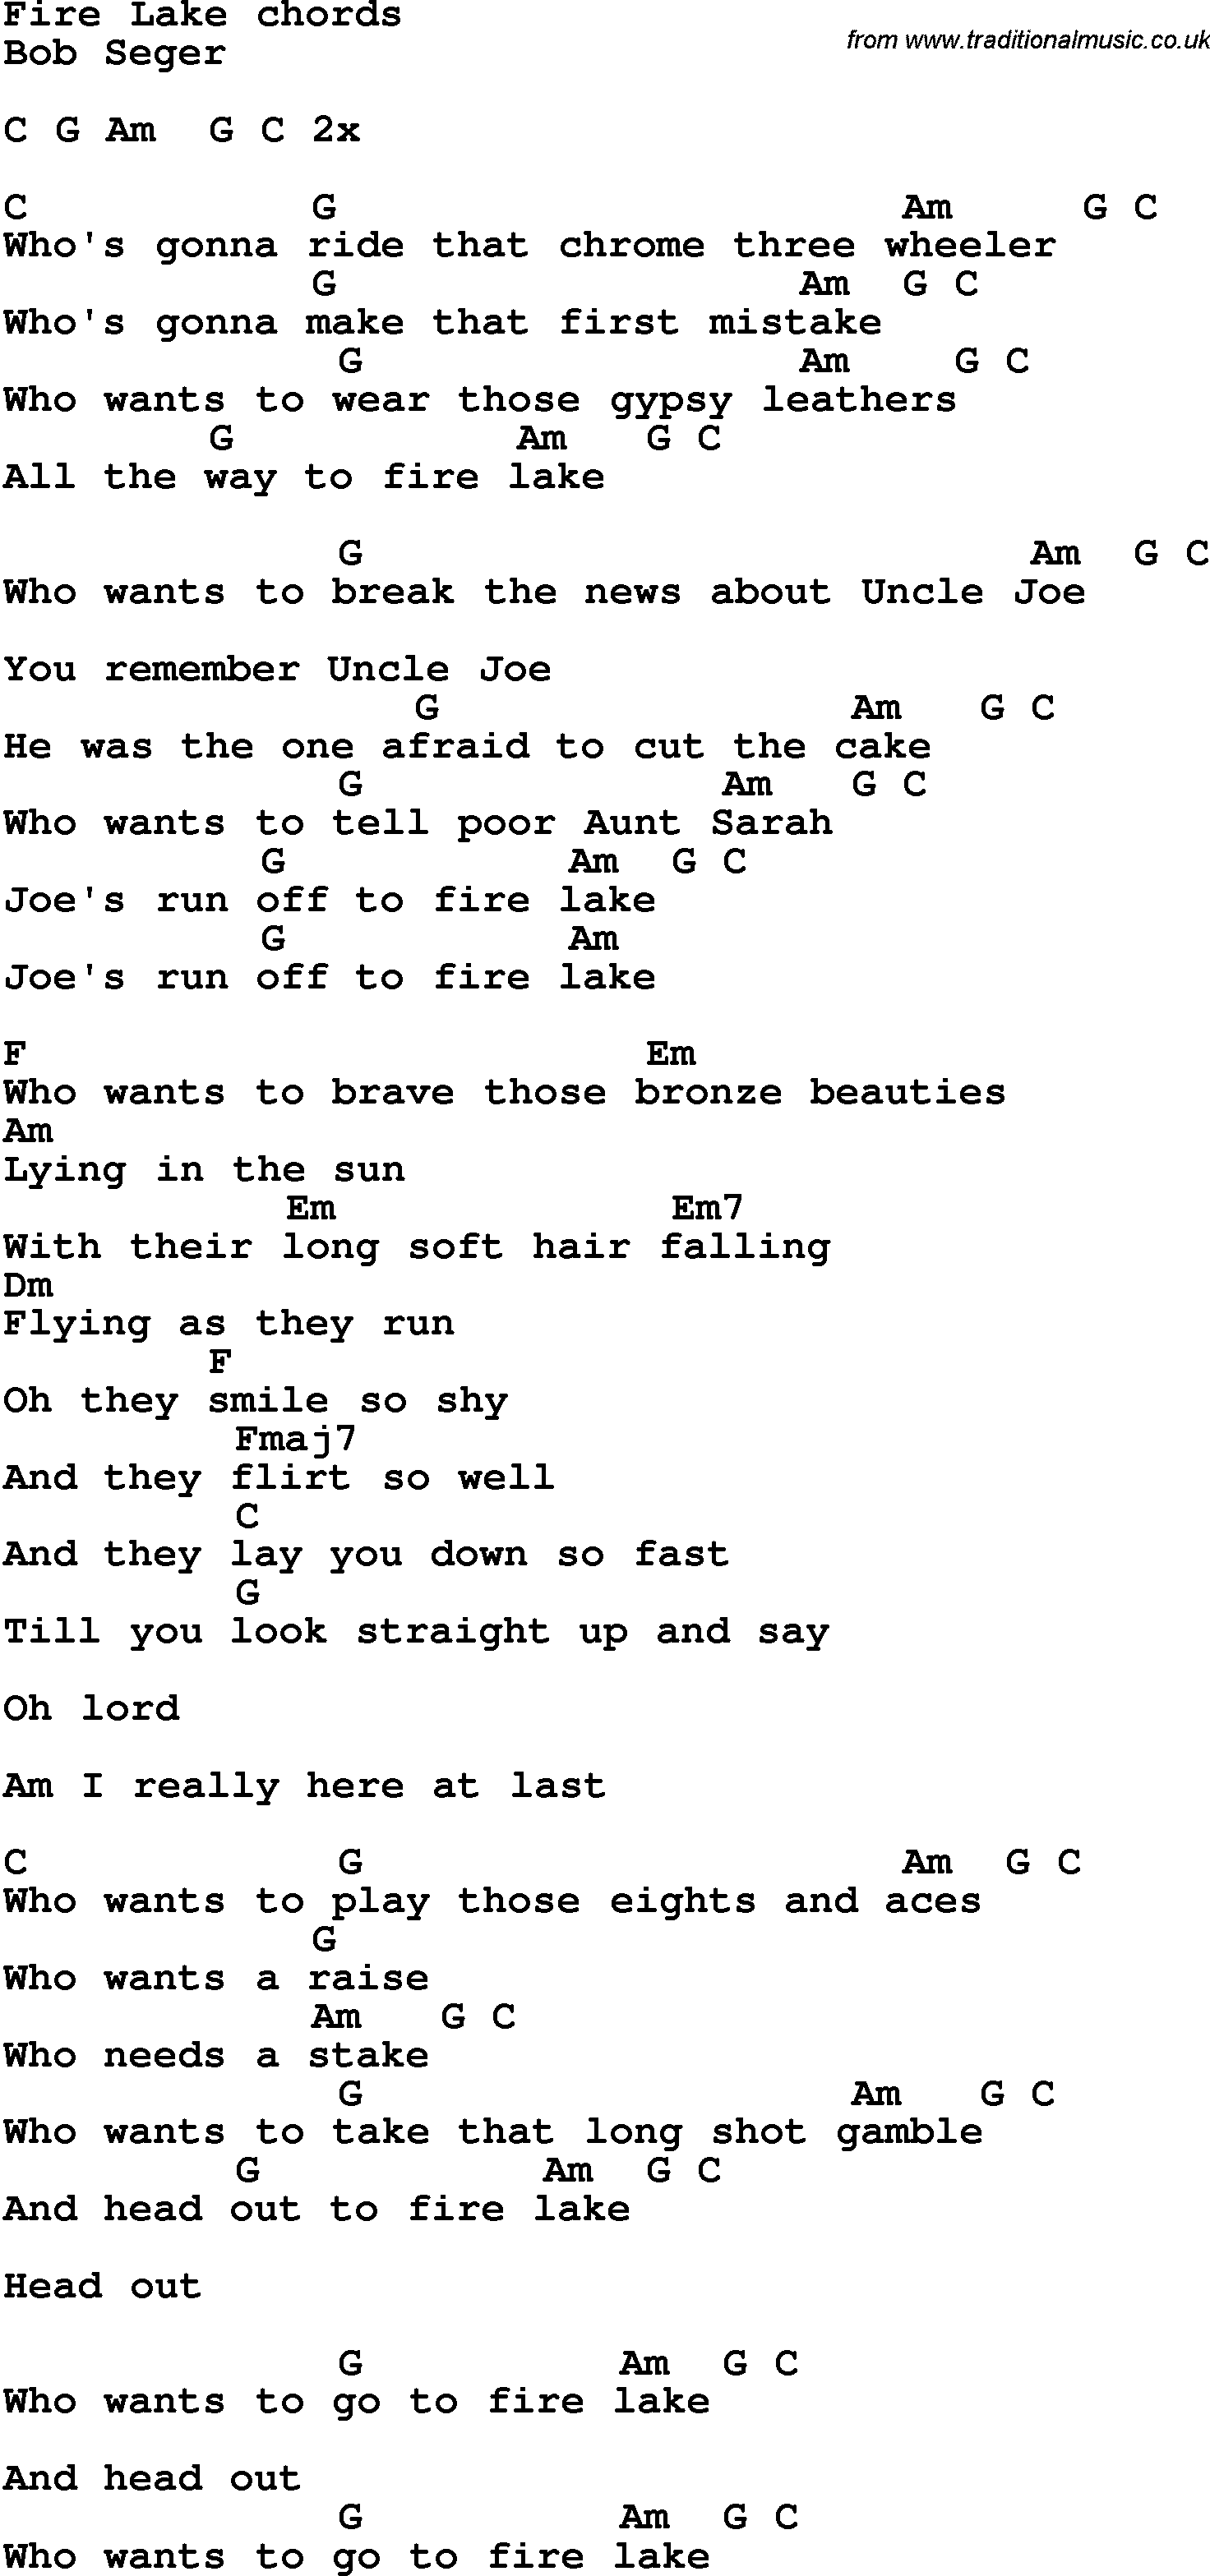 Song Lyrics with guitar chords for Fire Lake